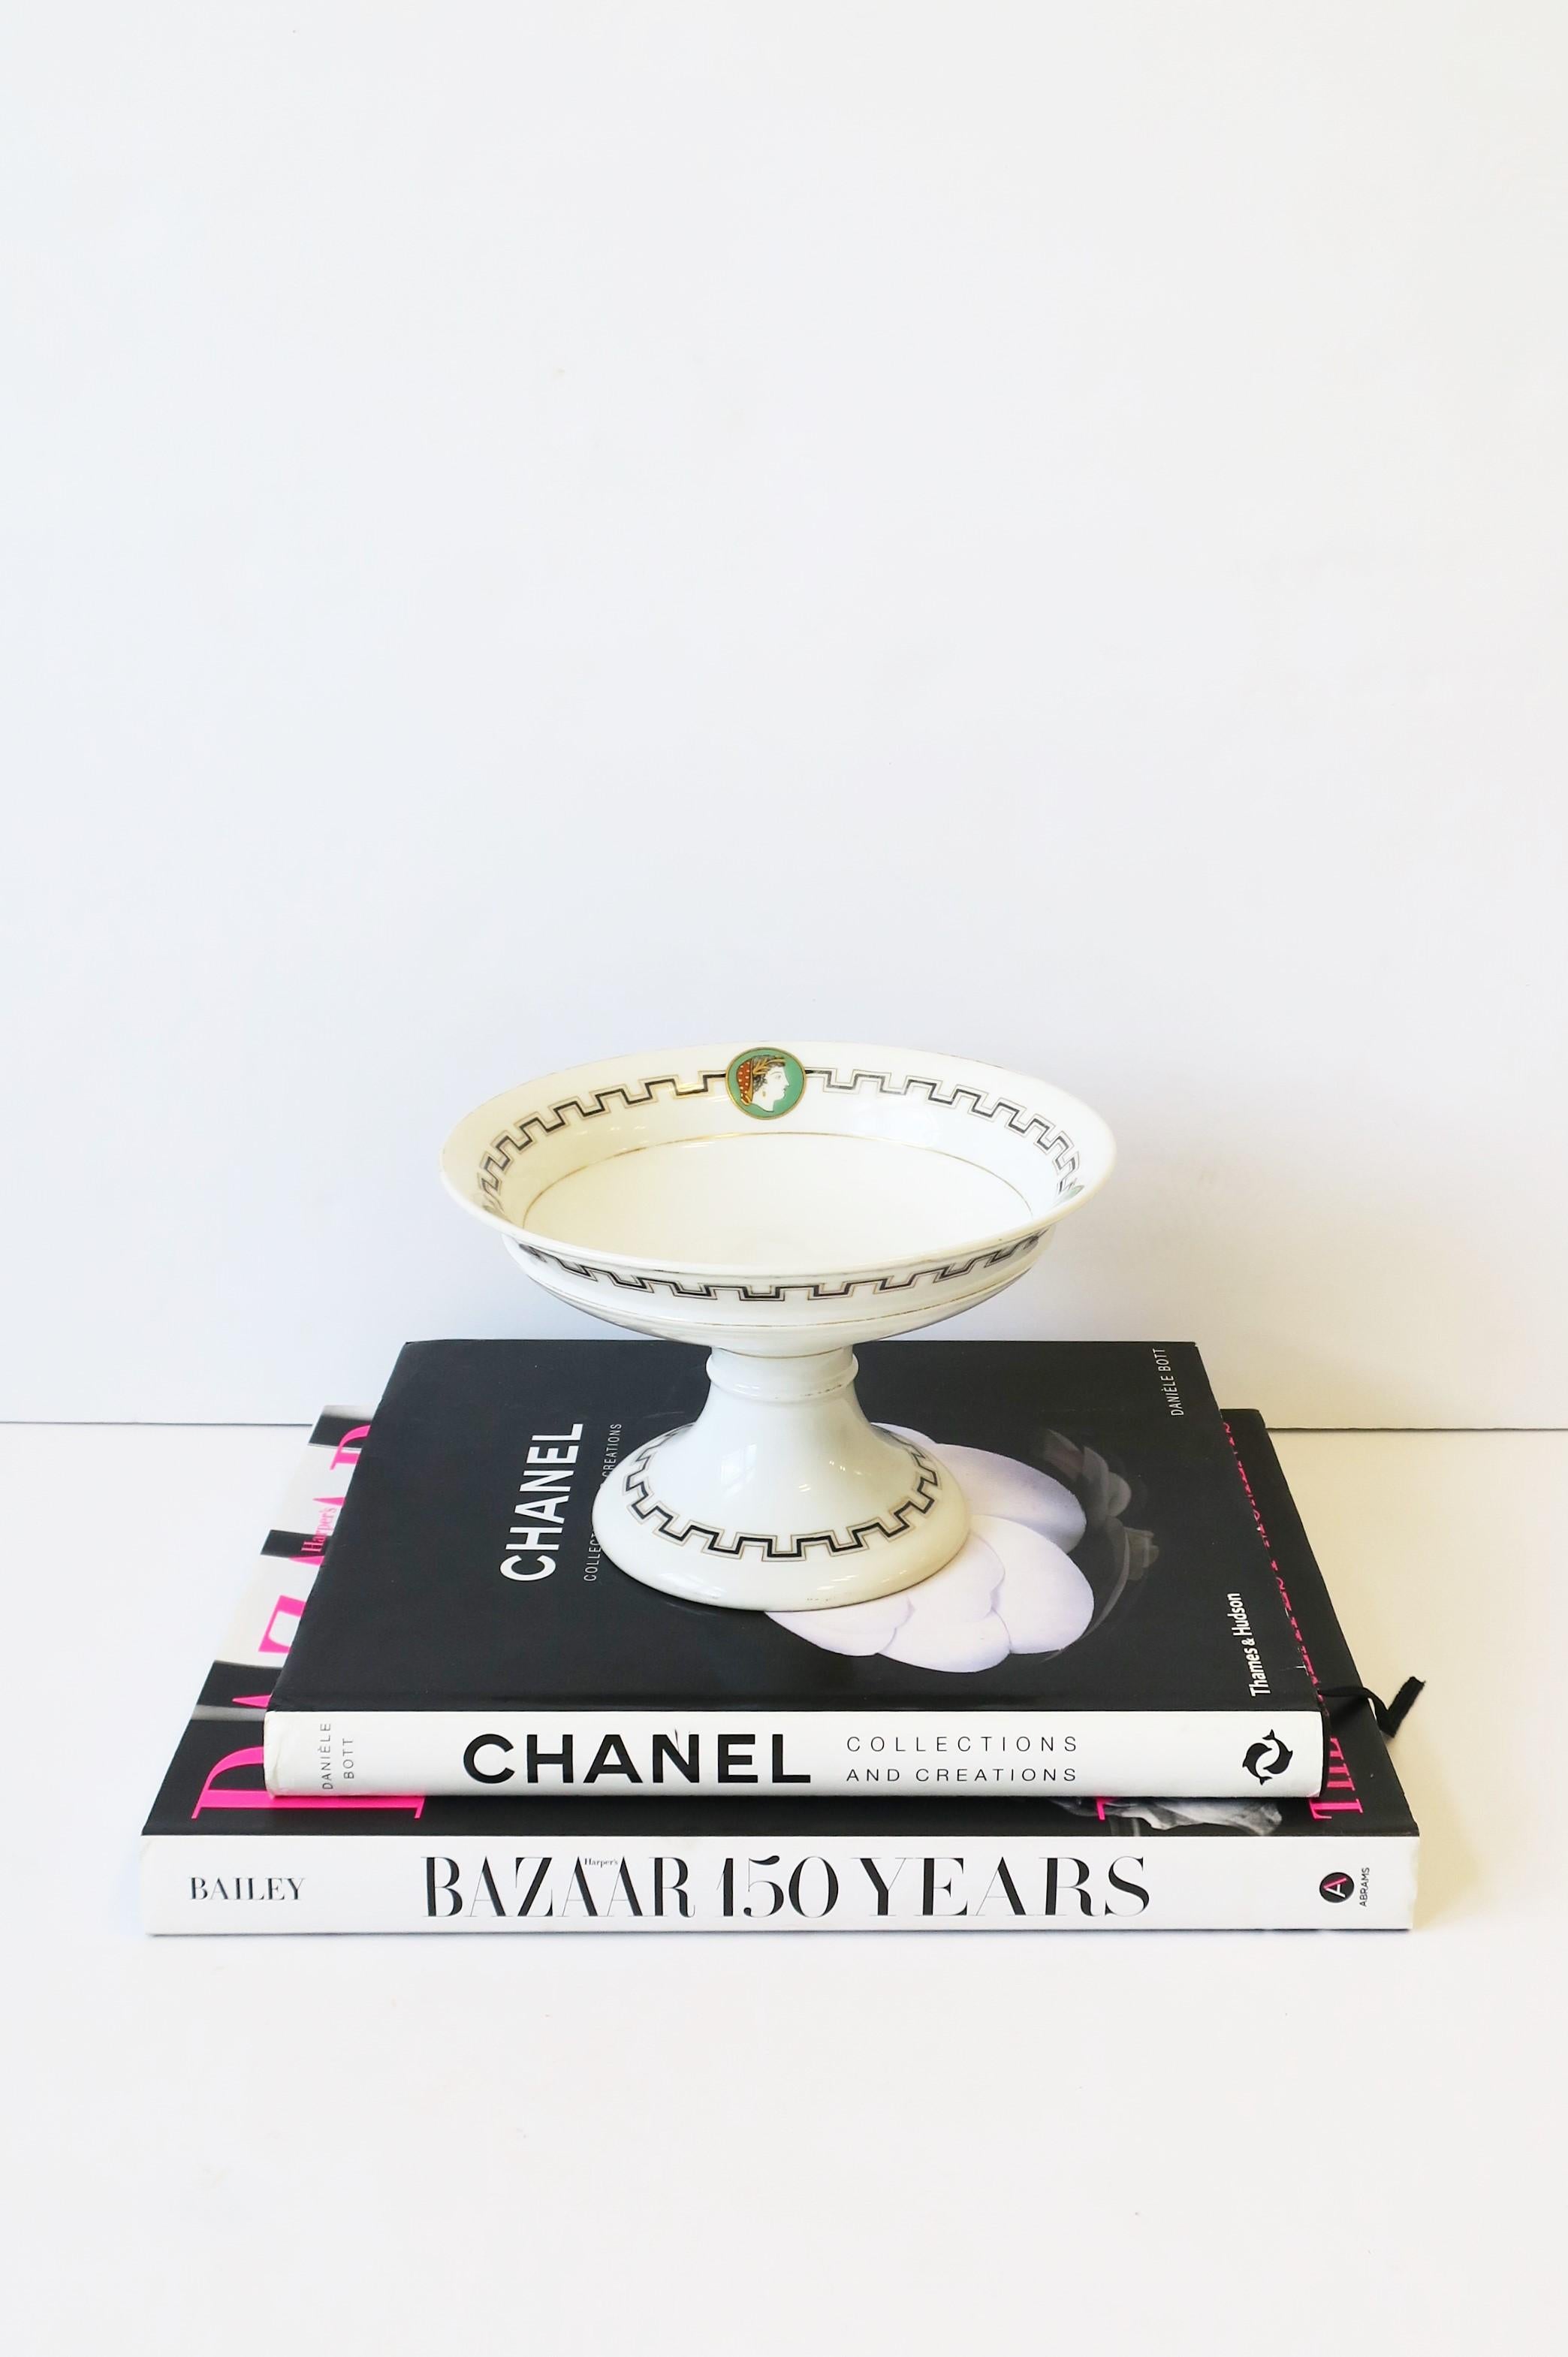 Glazed Italian White Black and Gold Tazza or Compote Bowl with Greek-Key Design